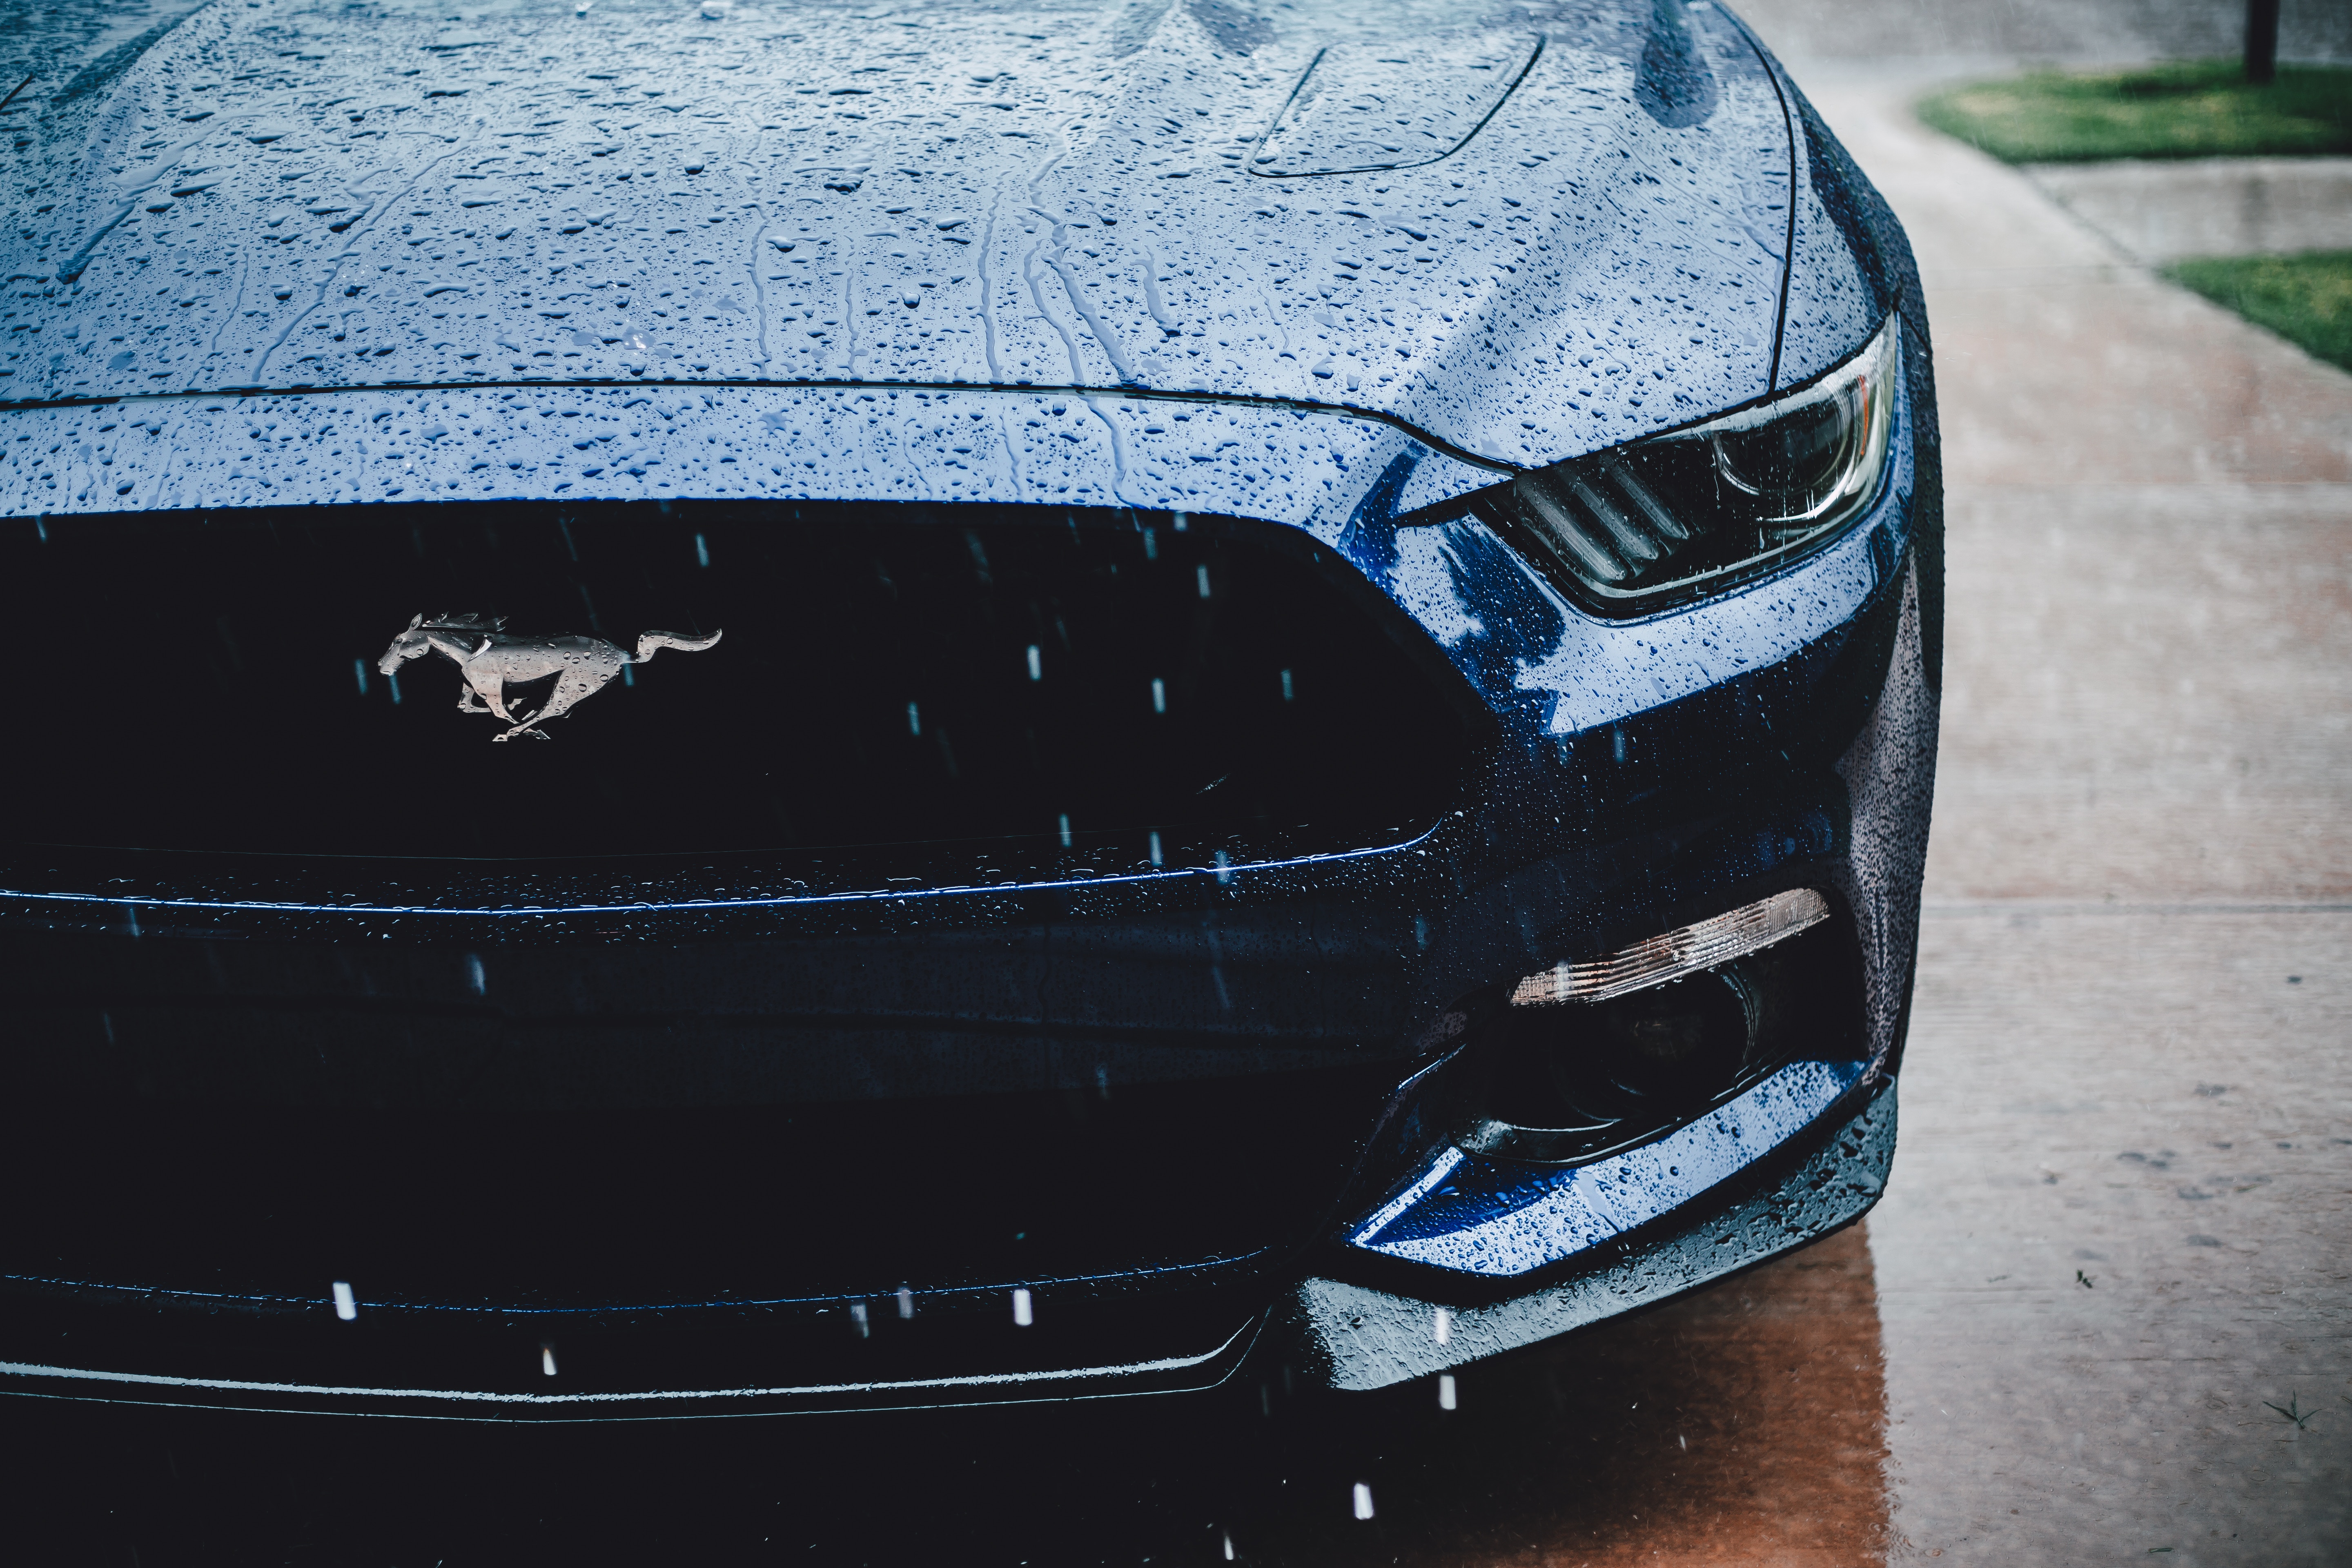 rain, cars, front view, headlight, ford mustang